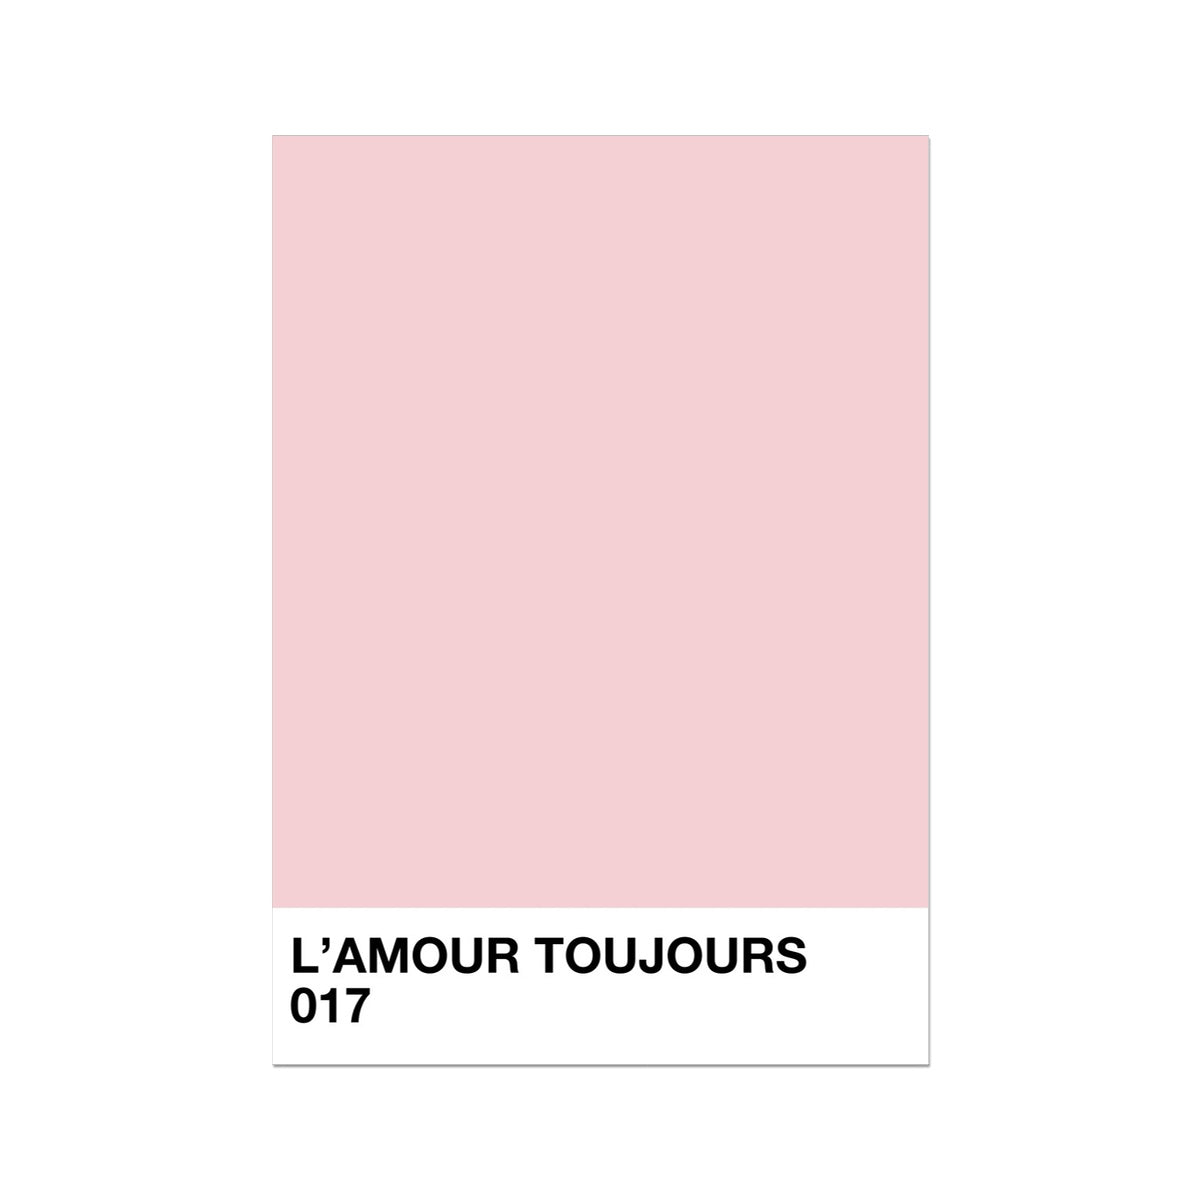 © les muses / Shades is a collection of color shade wall art prints perfect for a modern or minimalist gallery wall. The pastel color block posters have a minimal aesthetic and comes in an array of dreamy colors.